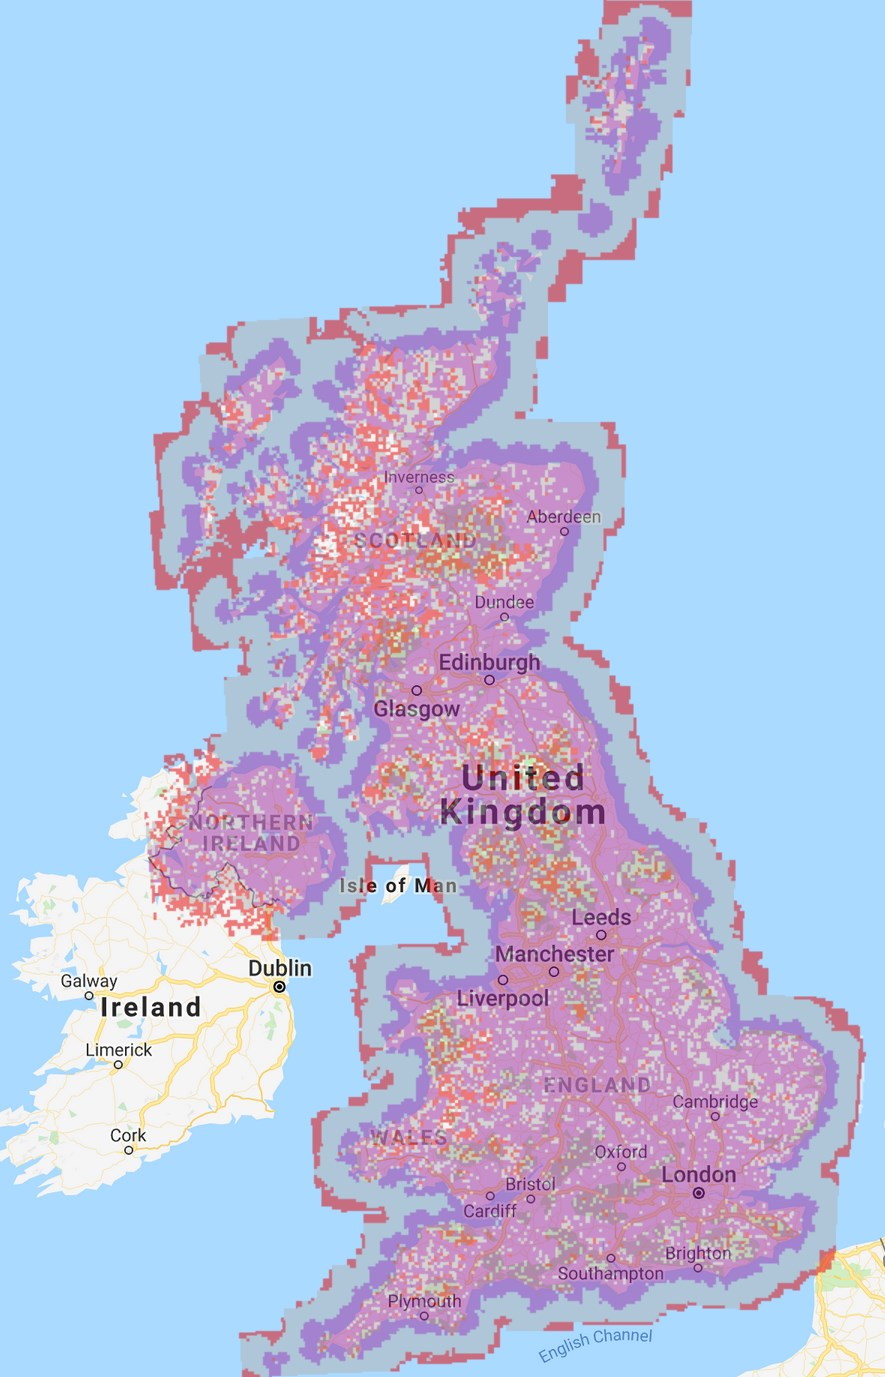 Phone Signal Coverage Map Lebara Mobile Uk Coverage: 4G & 5G Network Coverage Map